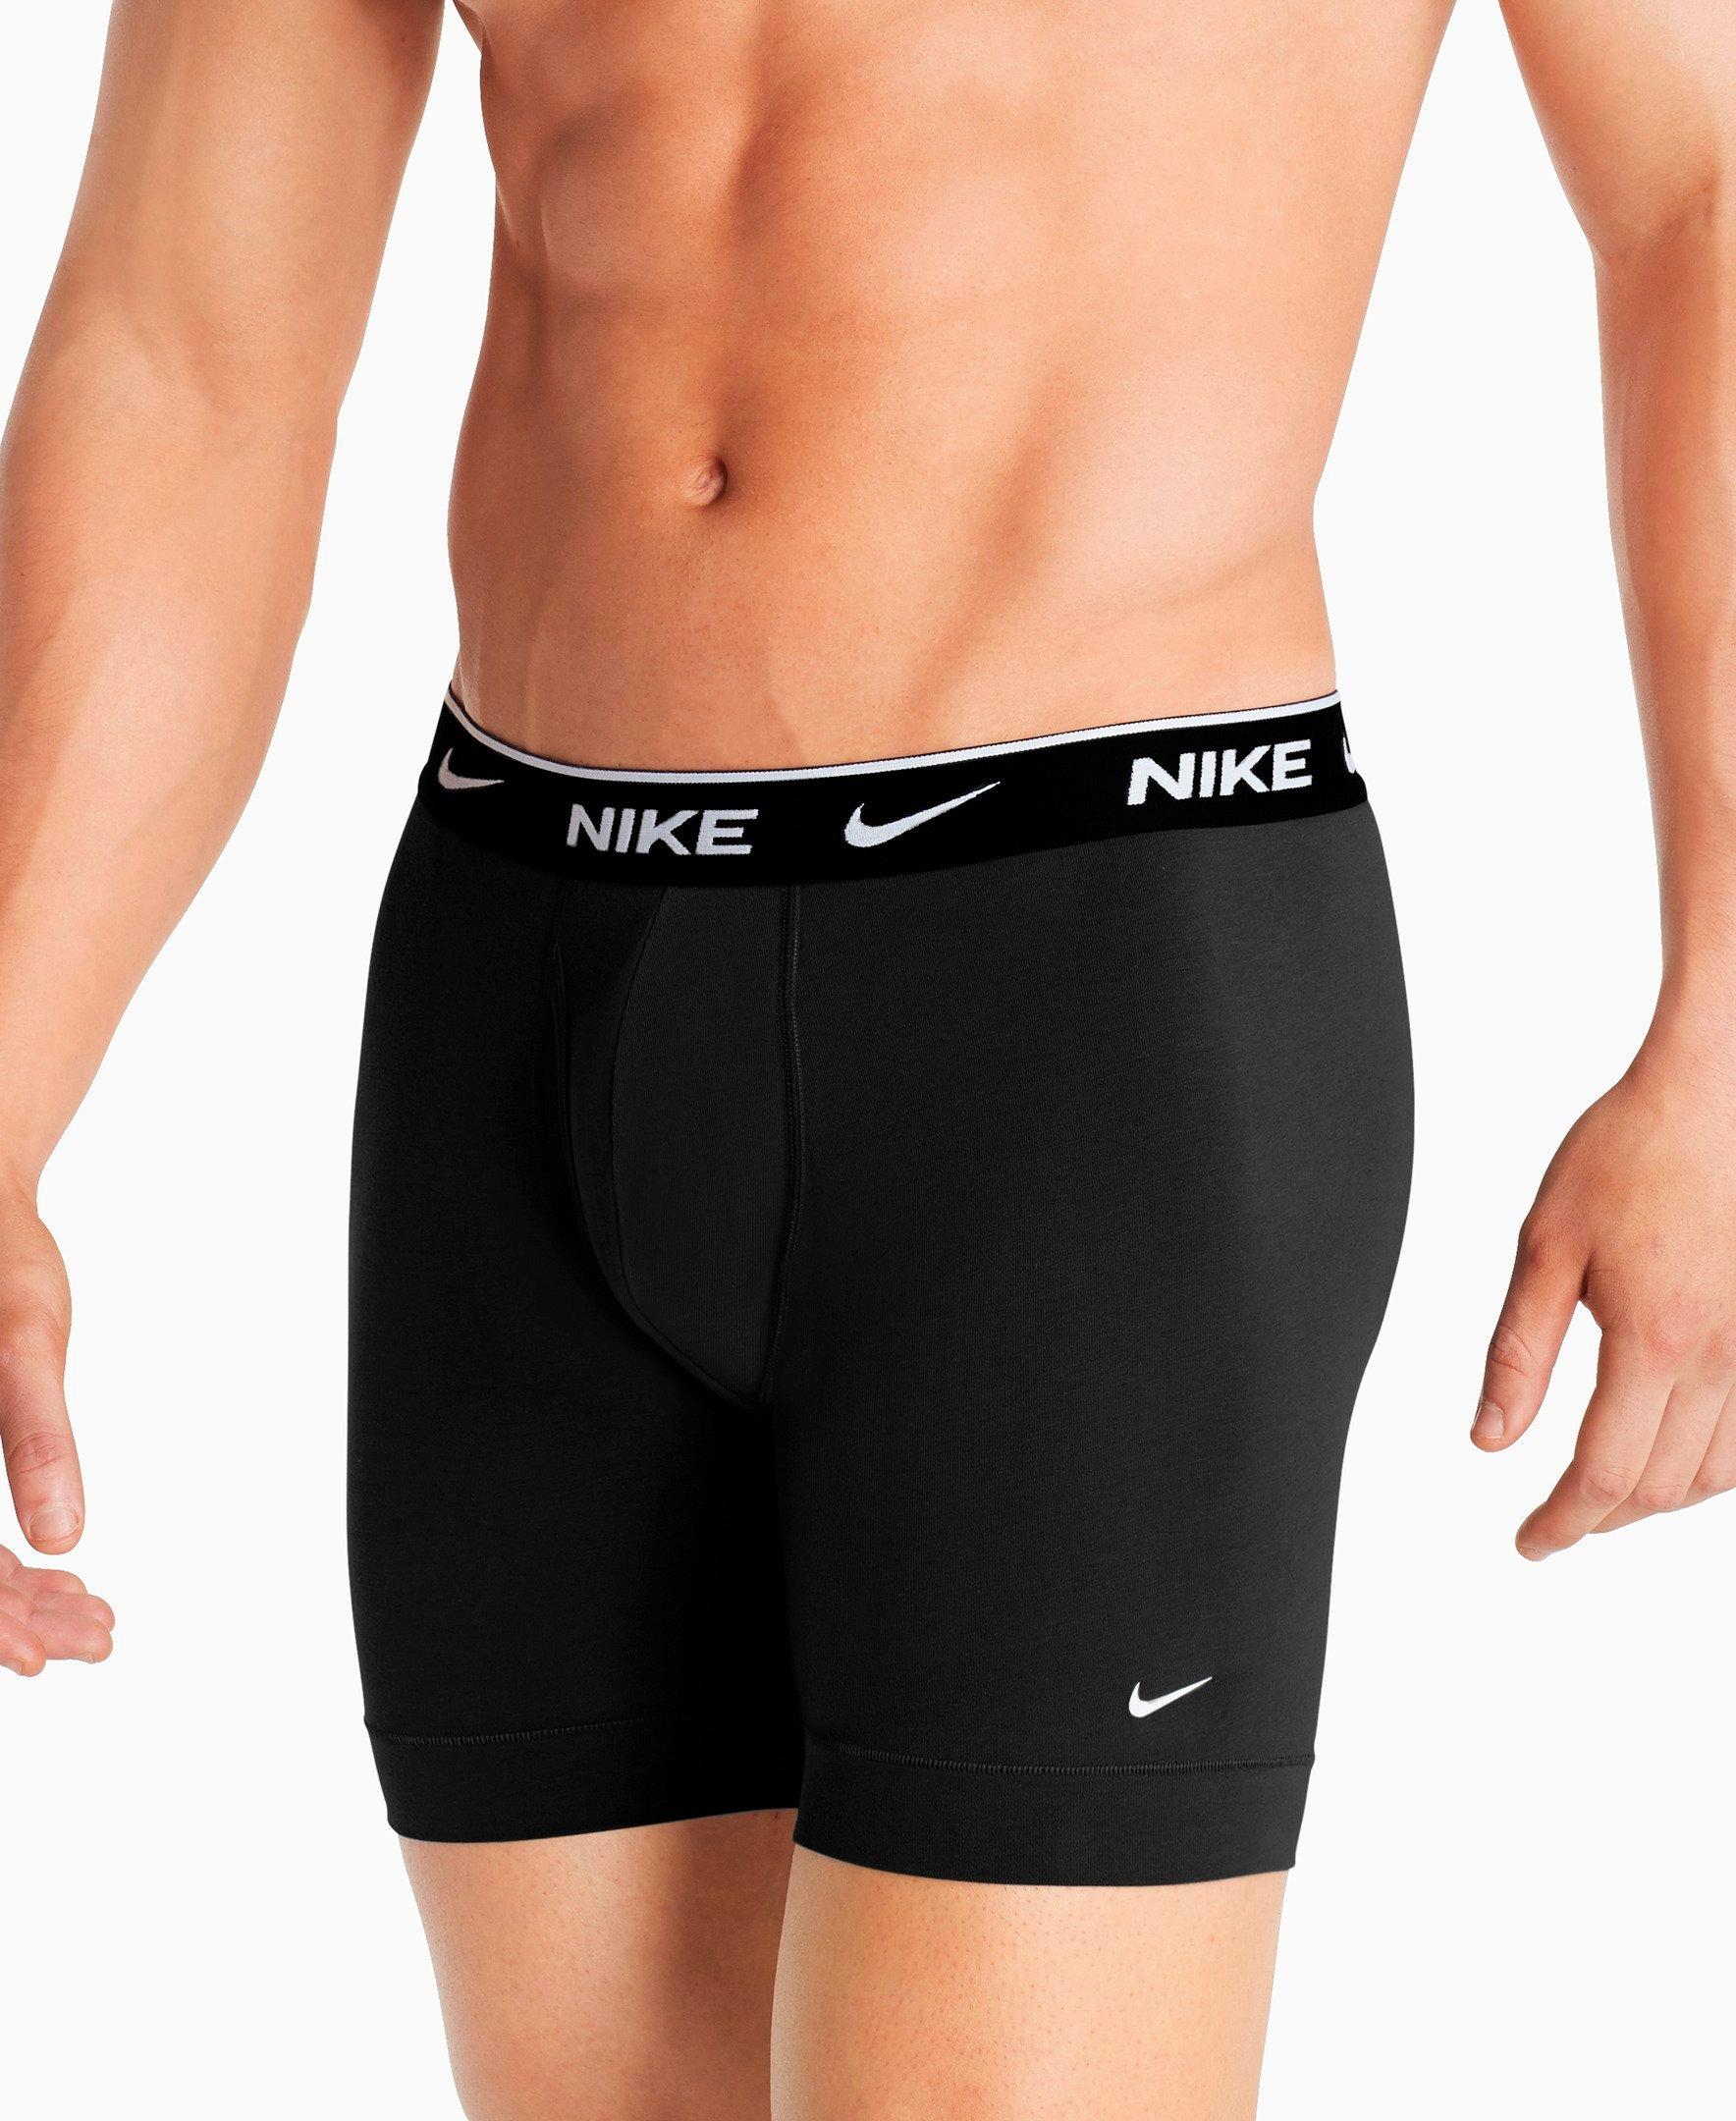 nike youth boxer briefs